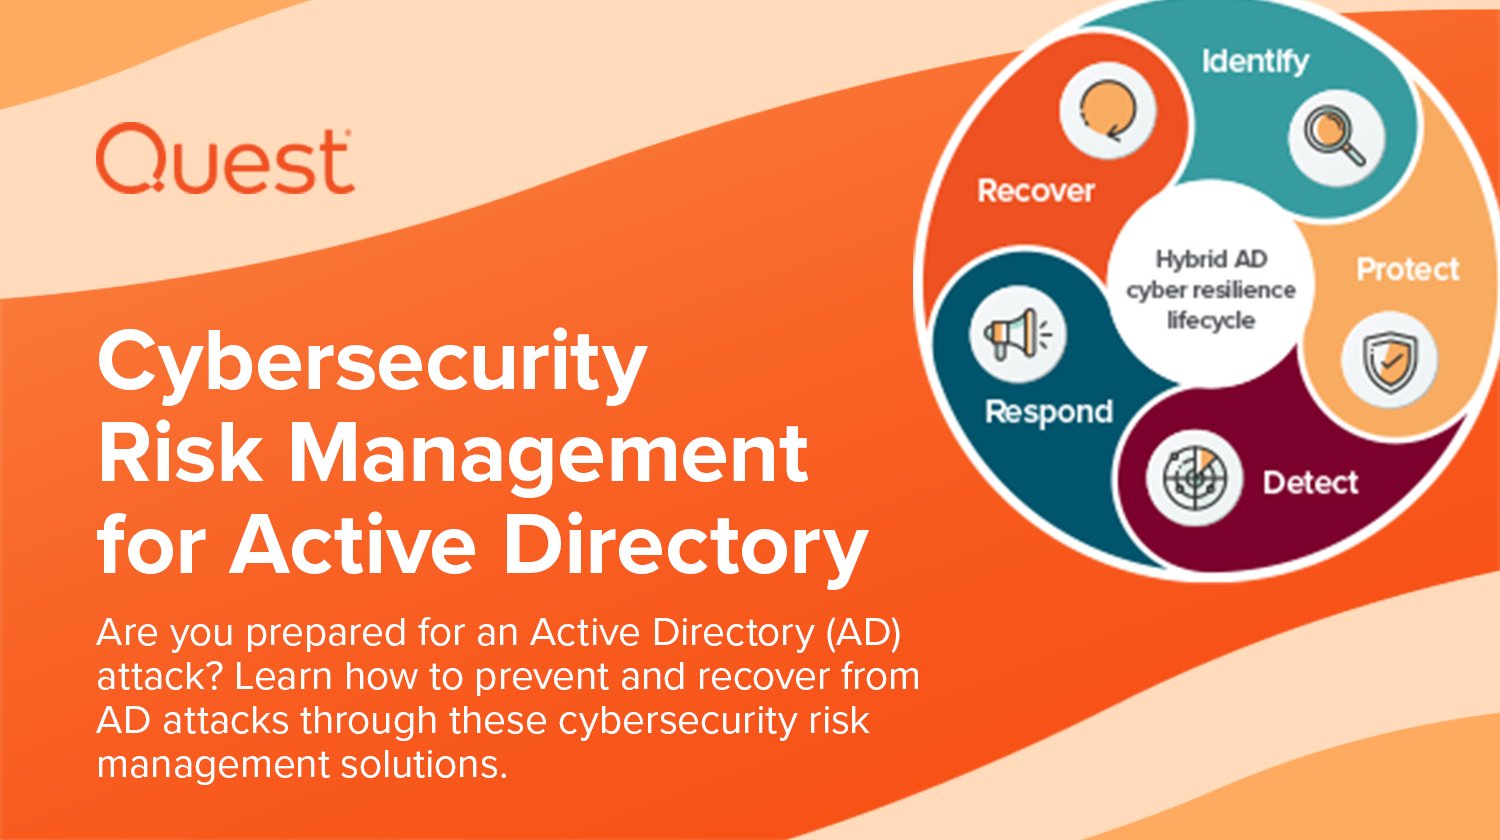 Quest Software | Cybersecurity for Active Directory